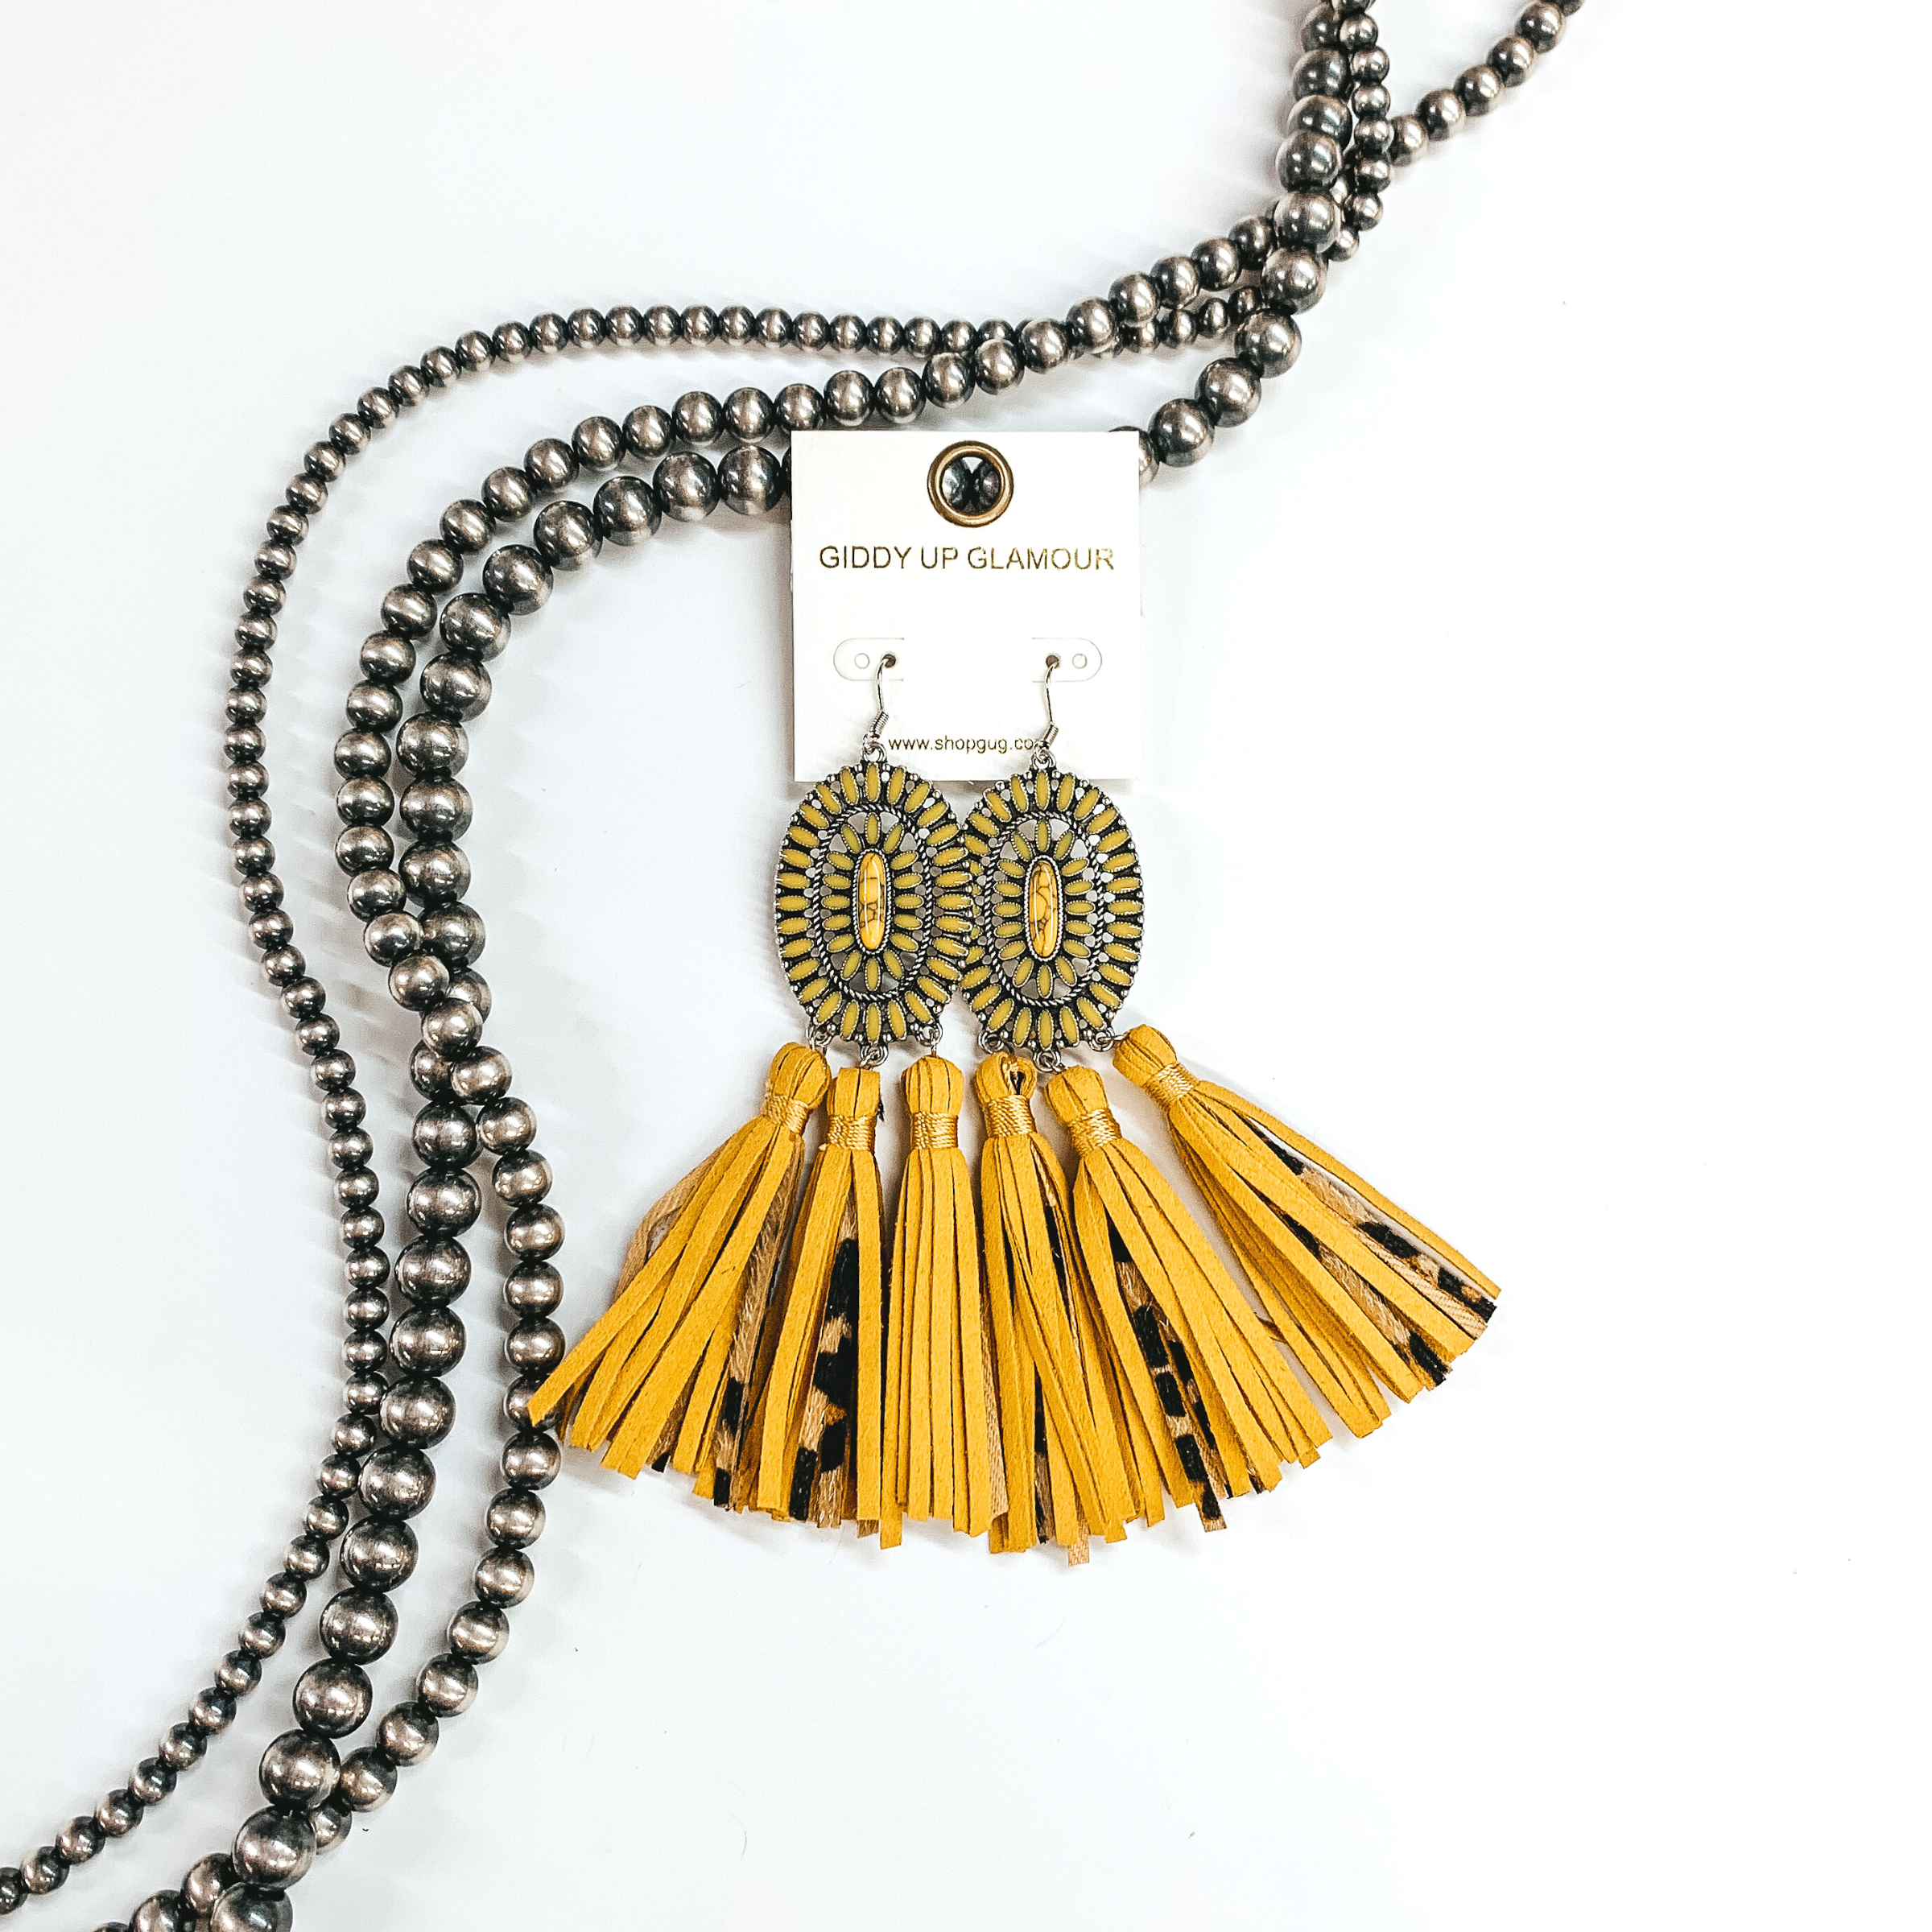 Yellow stone oval cluster earrings in a silver settings with three  faux leather tassels in yellow and leopard print. These earrings are taken  on a white background and with Navajo pearls in the back as decor.